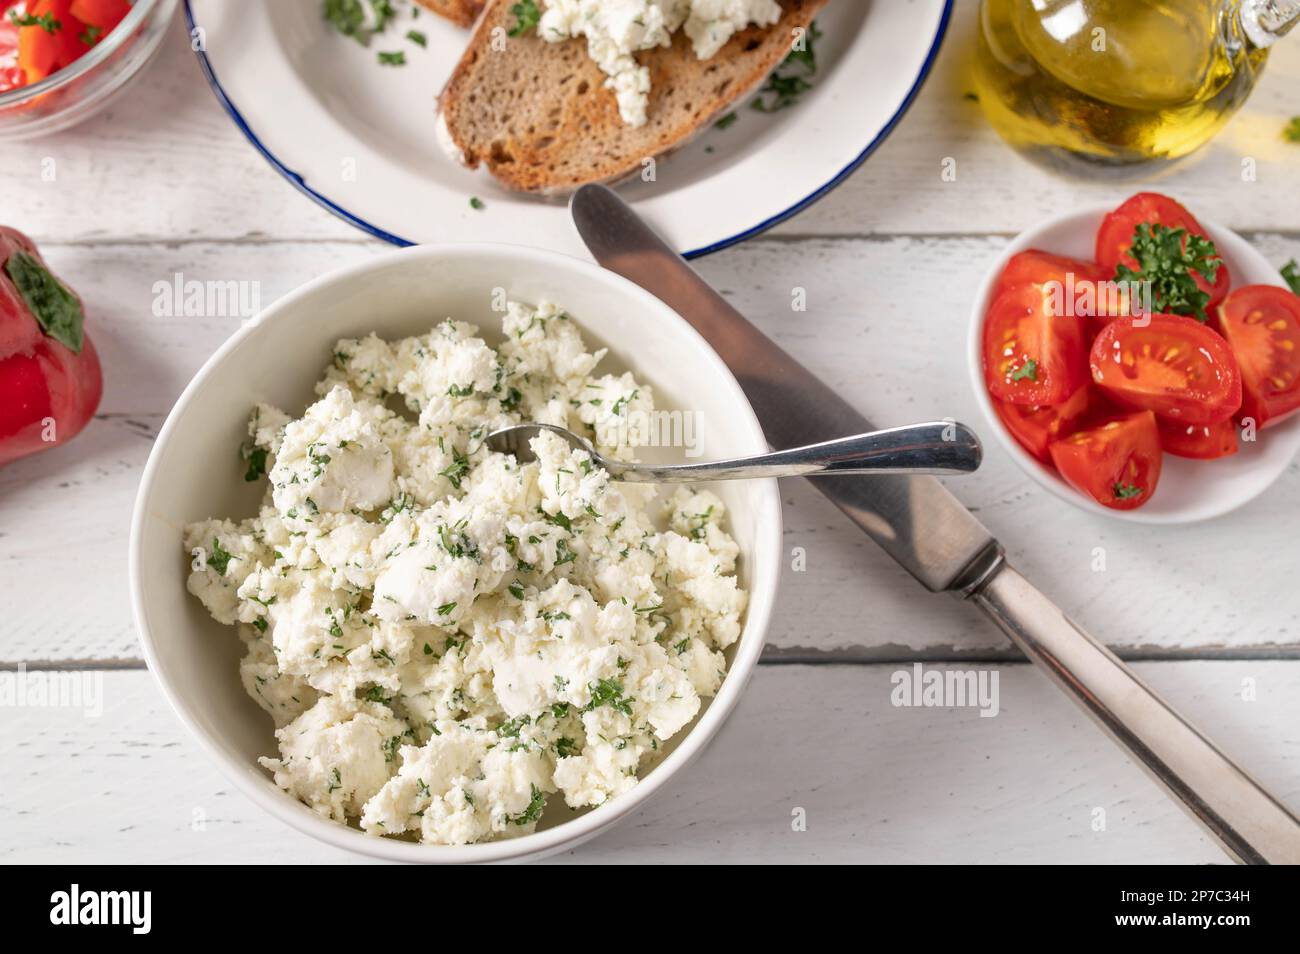 Marinated Feta cheese or sheep cheese with herbs and olive oil served for salad with roasted bread on white table Stock Photo